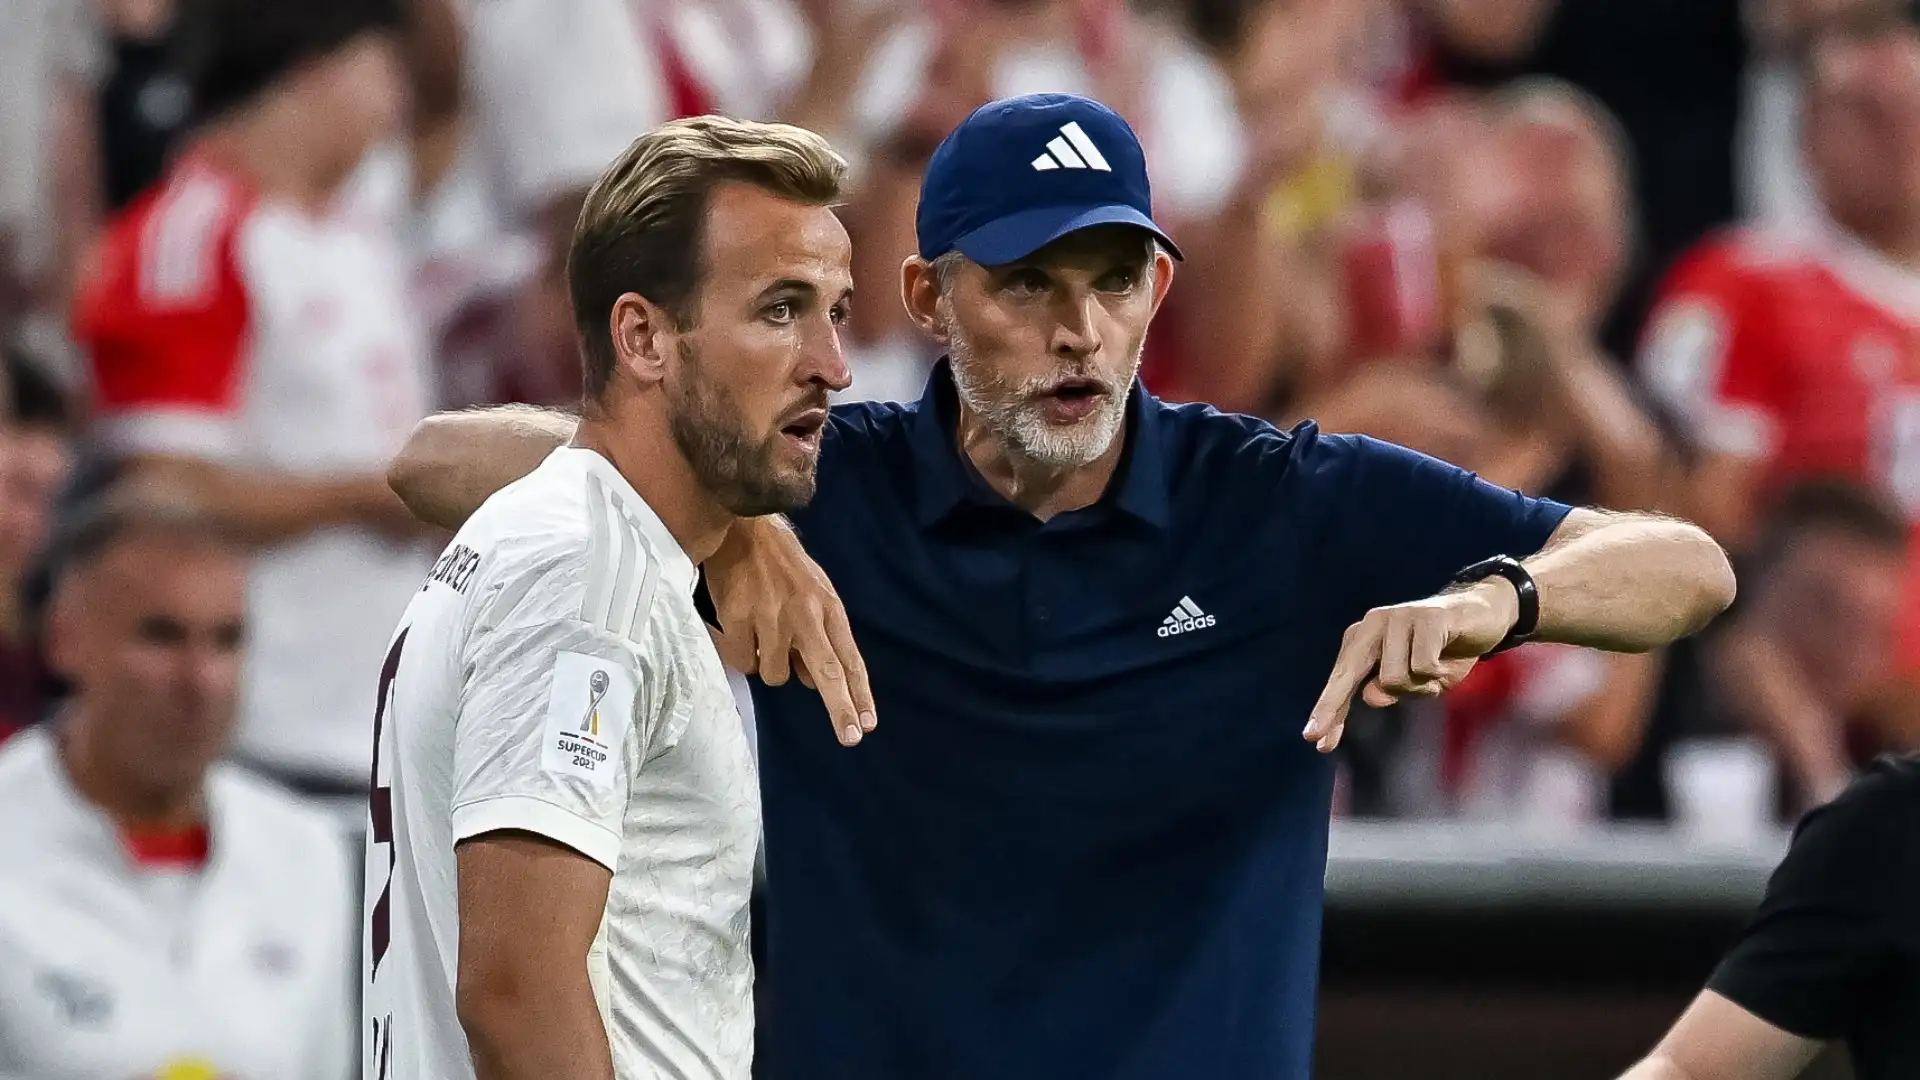 Thomas Tuchel to stay?! Harry Kane, Manuel Neuer and Thomas Muller among Bayern stars pushing for German giants to prevent coach’s departure after being rejected by several candidates